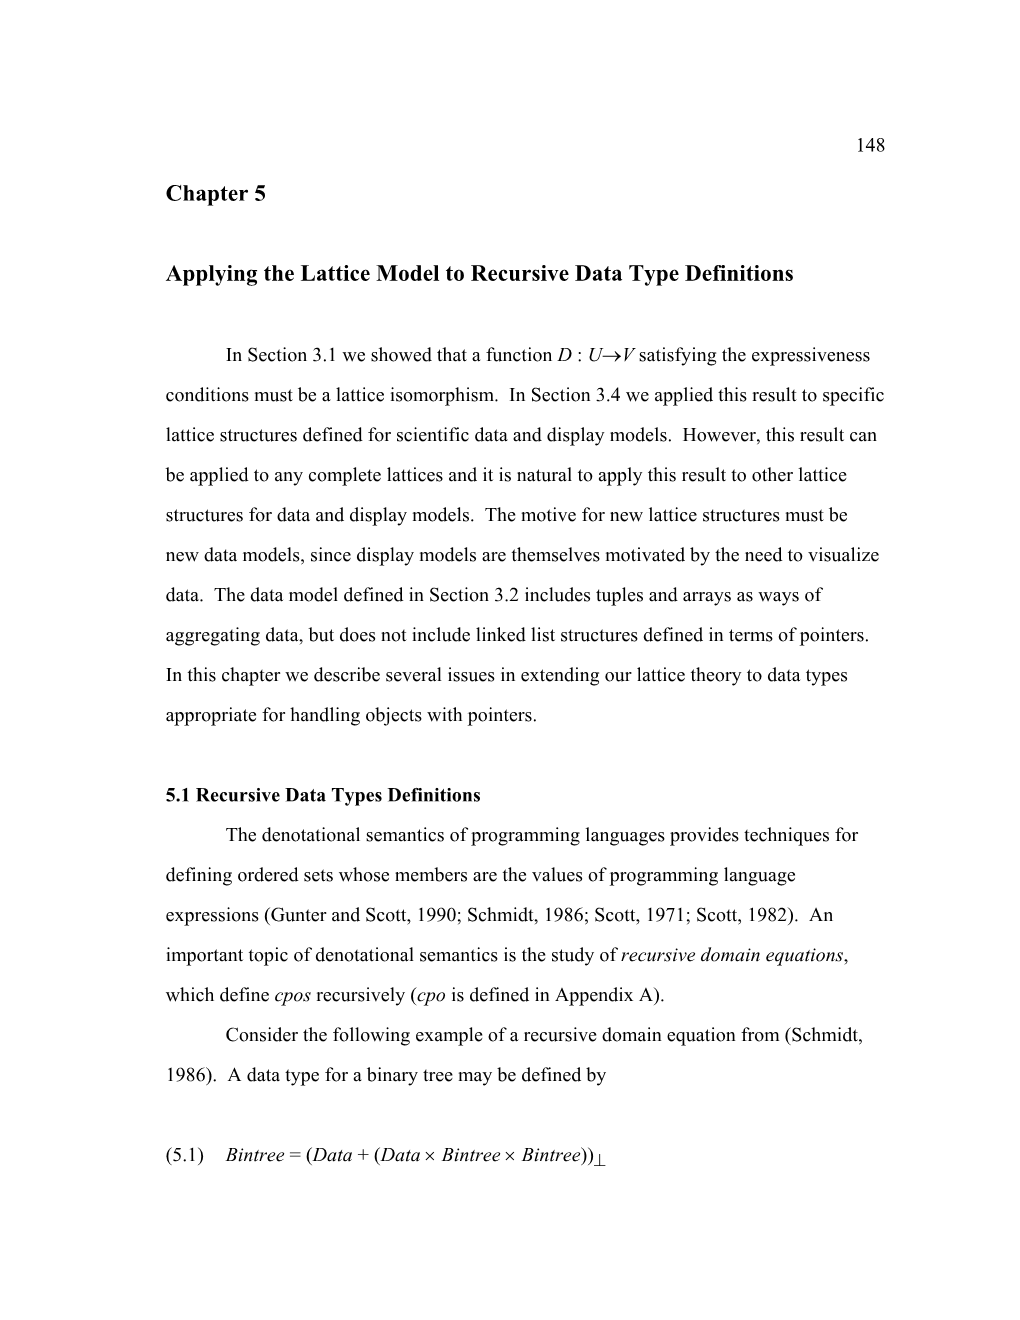 Chapter 5 Applying the Lattice Model to Recursive Data Type Definitions